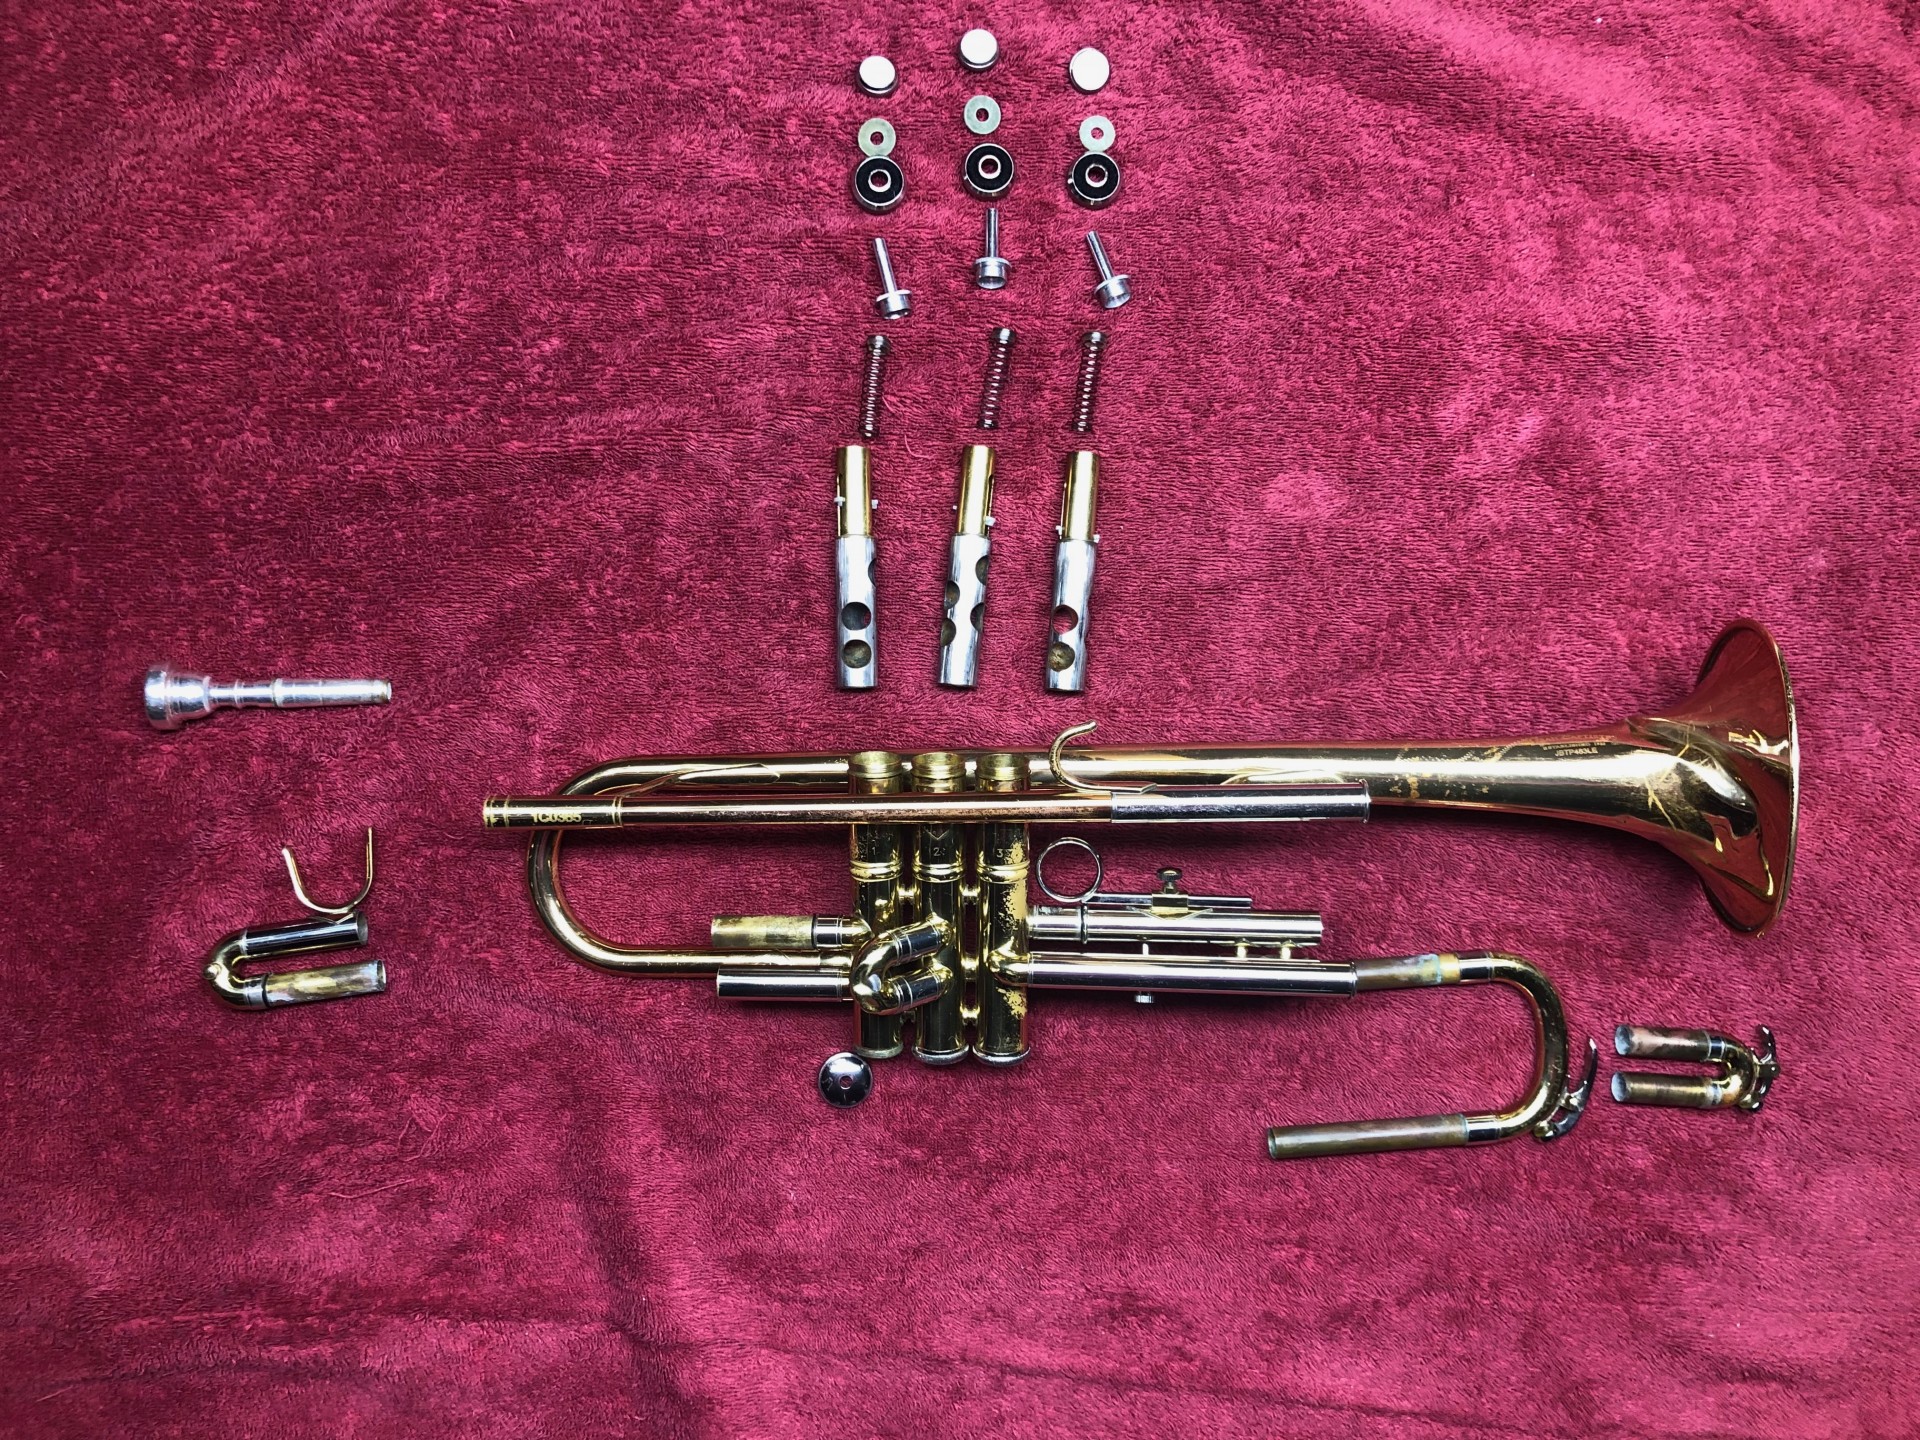 A disassembled trumpet